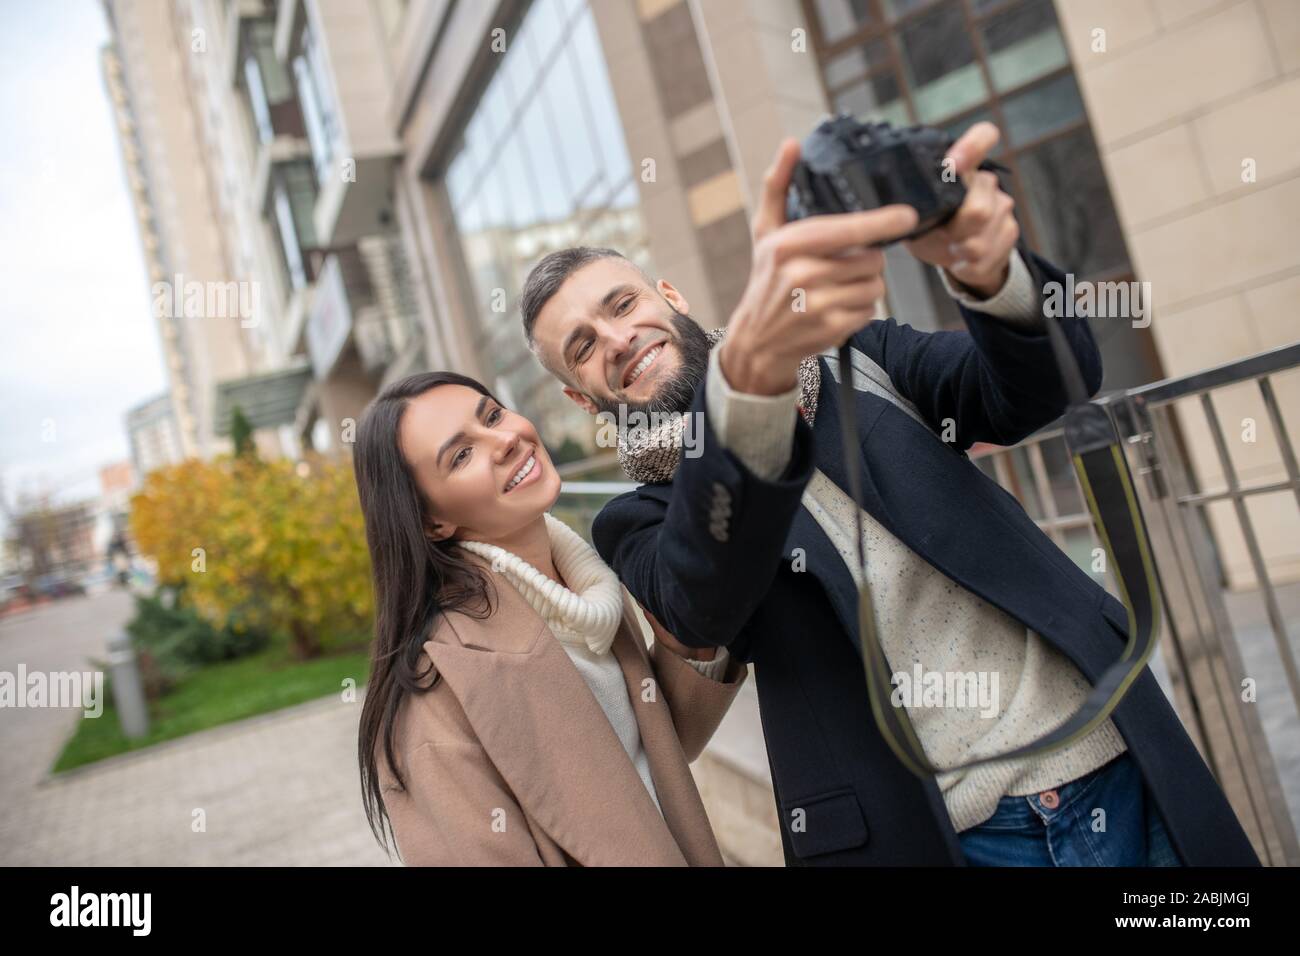 Nice married couple taking a photo of themselves Stock Photo